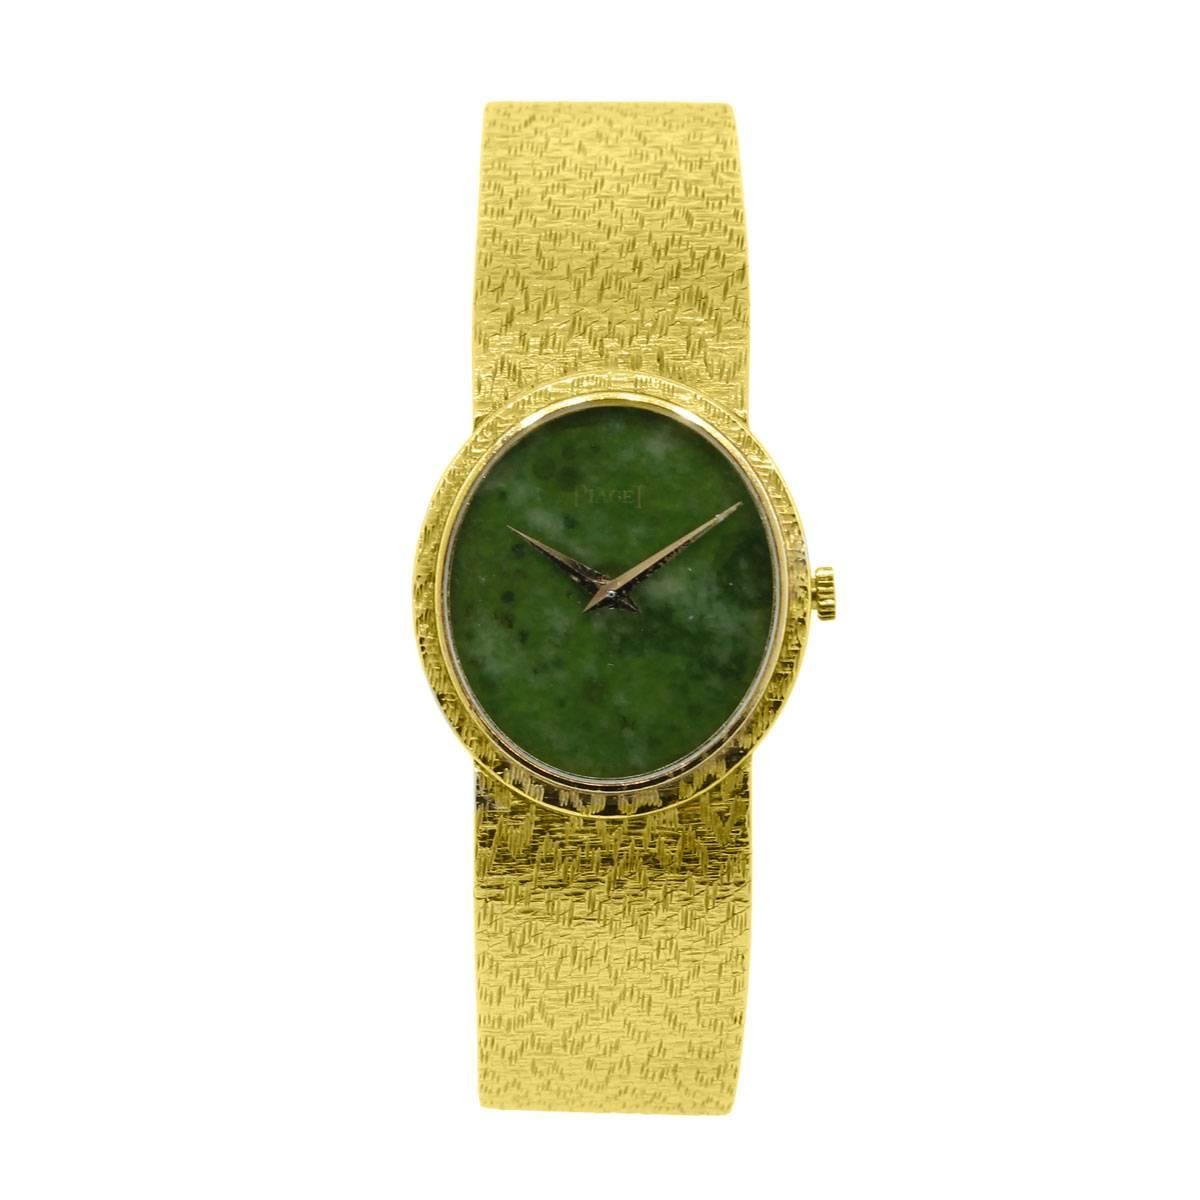 Brand: Piaget
Style: 18k Yellow Gold Jade Stone Dial Ladies Watch
Case Material: 18k Yellow Gold
Dial: Green Jade stone dial
Bezel: 18k Yellow Gold bezel
Case Measurements: 25mm X 27mm
Bracelet: 18k Yellow Gold
Clasp: Jeweler's Clasp
Movement: Hand